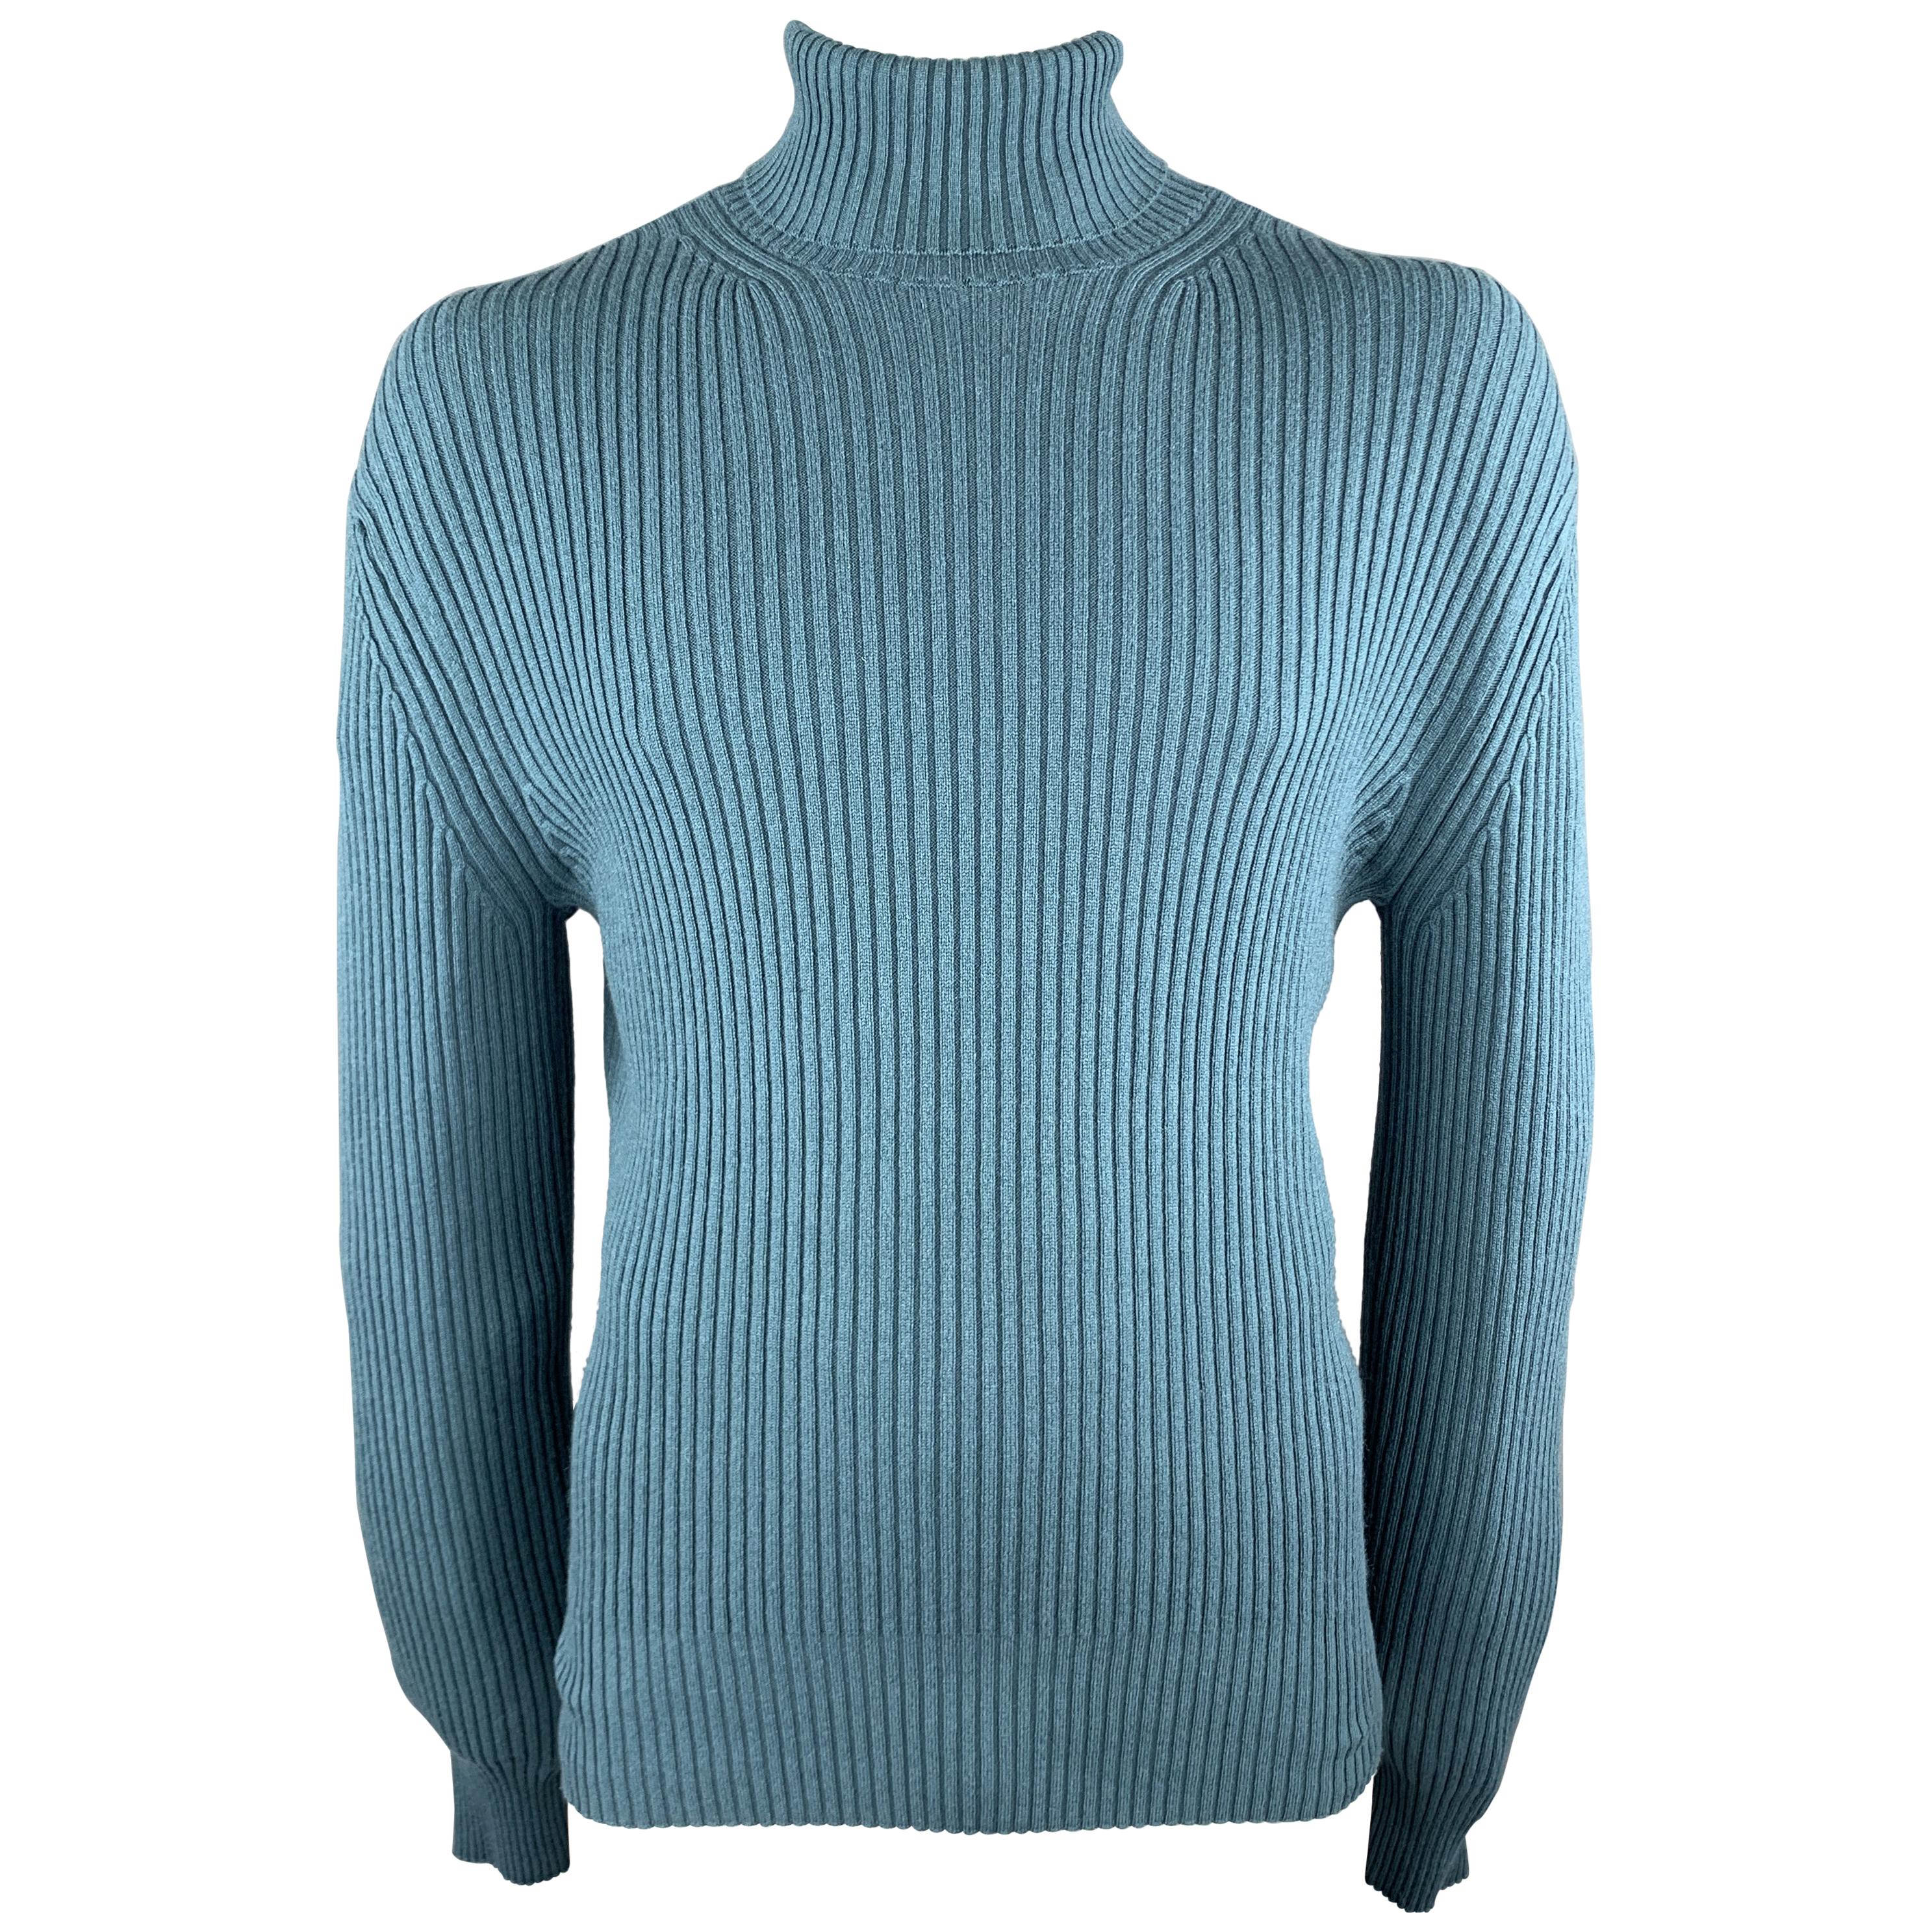 TOM FORD Size 44 Teal Ribbed Knit Cashmere Turtleneck Sweater